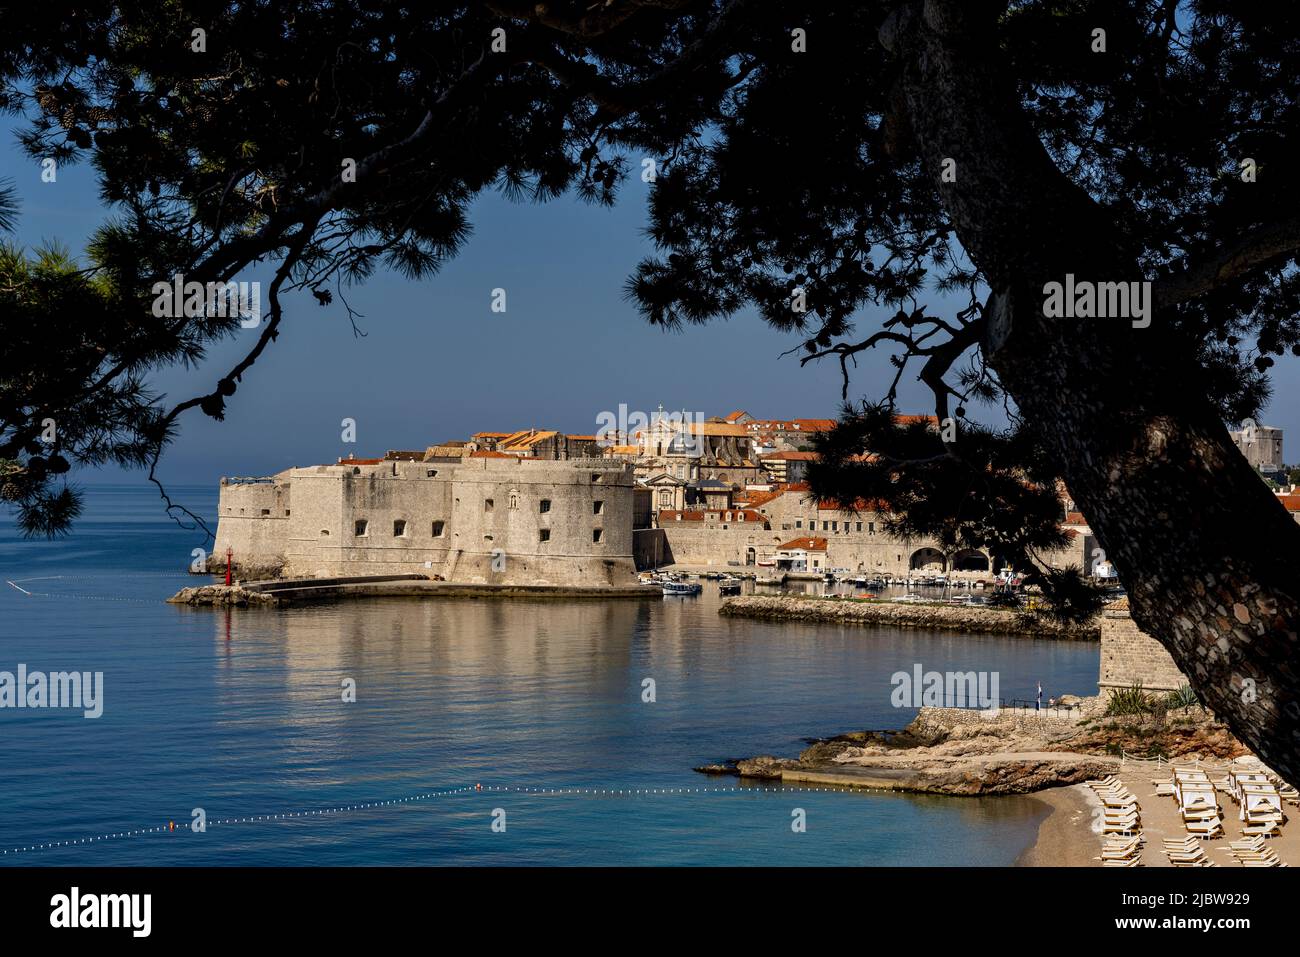 View of City Walls and Harbor of Old Town Dubrovnik from Ulica Frana Supila Promenade Stock Photo